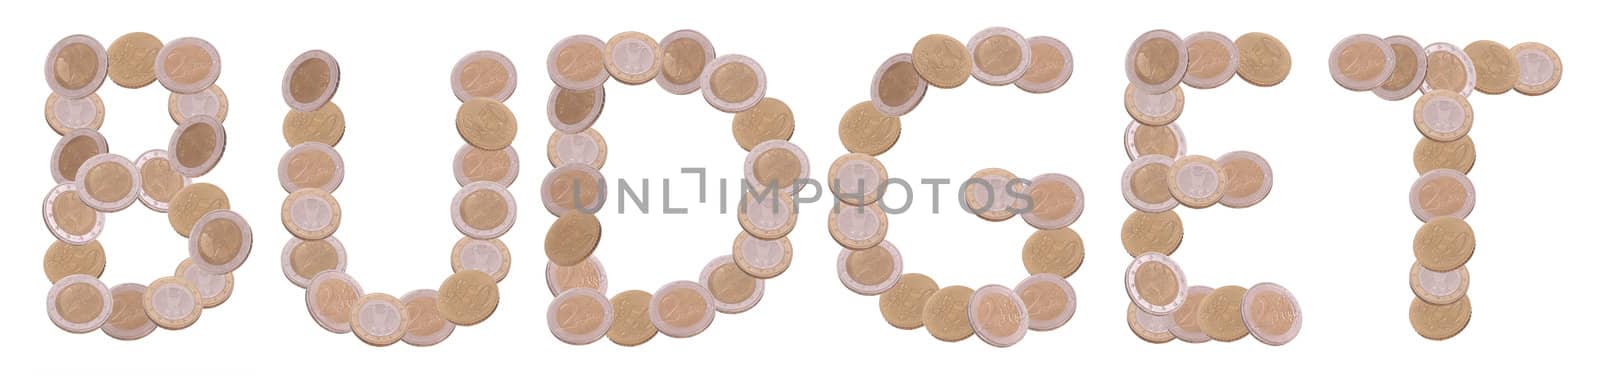 budget - written with coins on white background